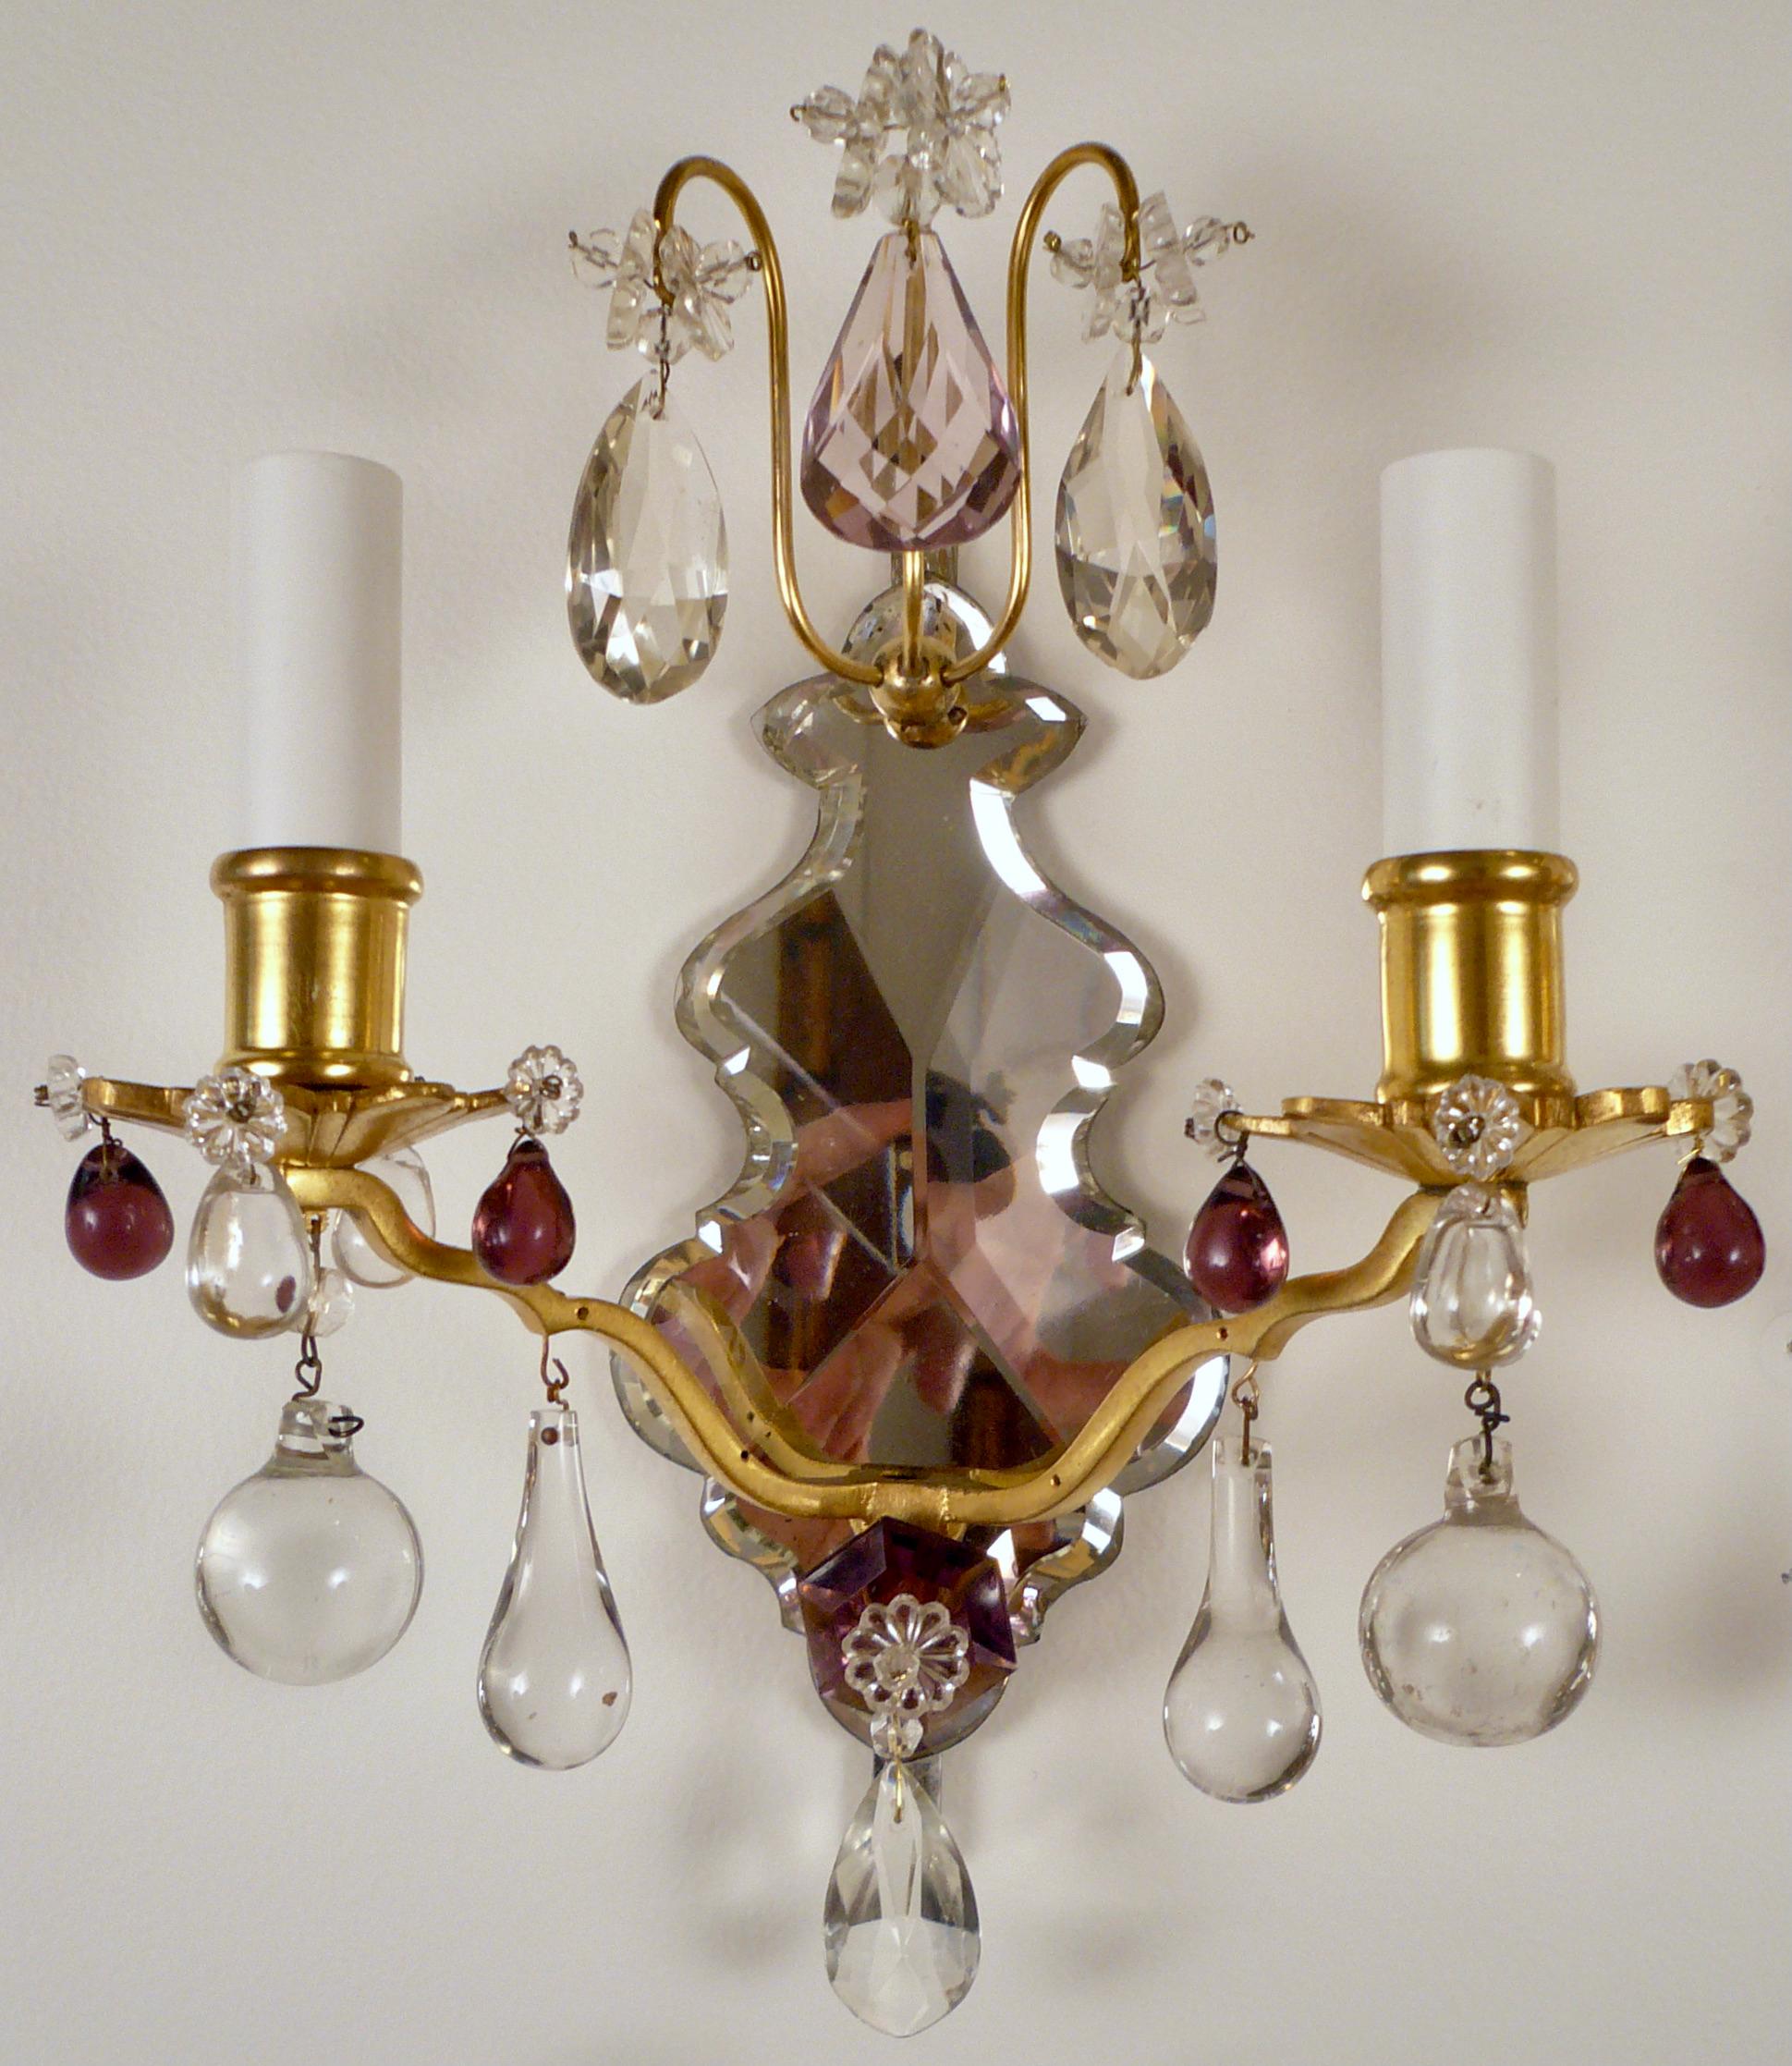 This set of four sconces, having mirrored pendalogue backplates issuing gilt bronze arms and bobesches
feature pale amethyst and clear cut crystal drops.